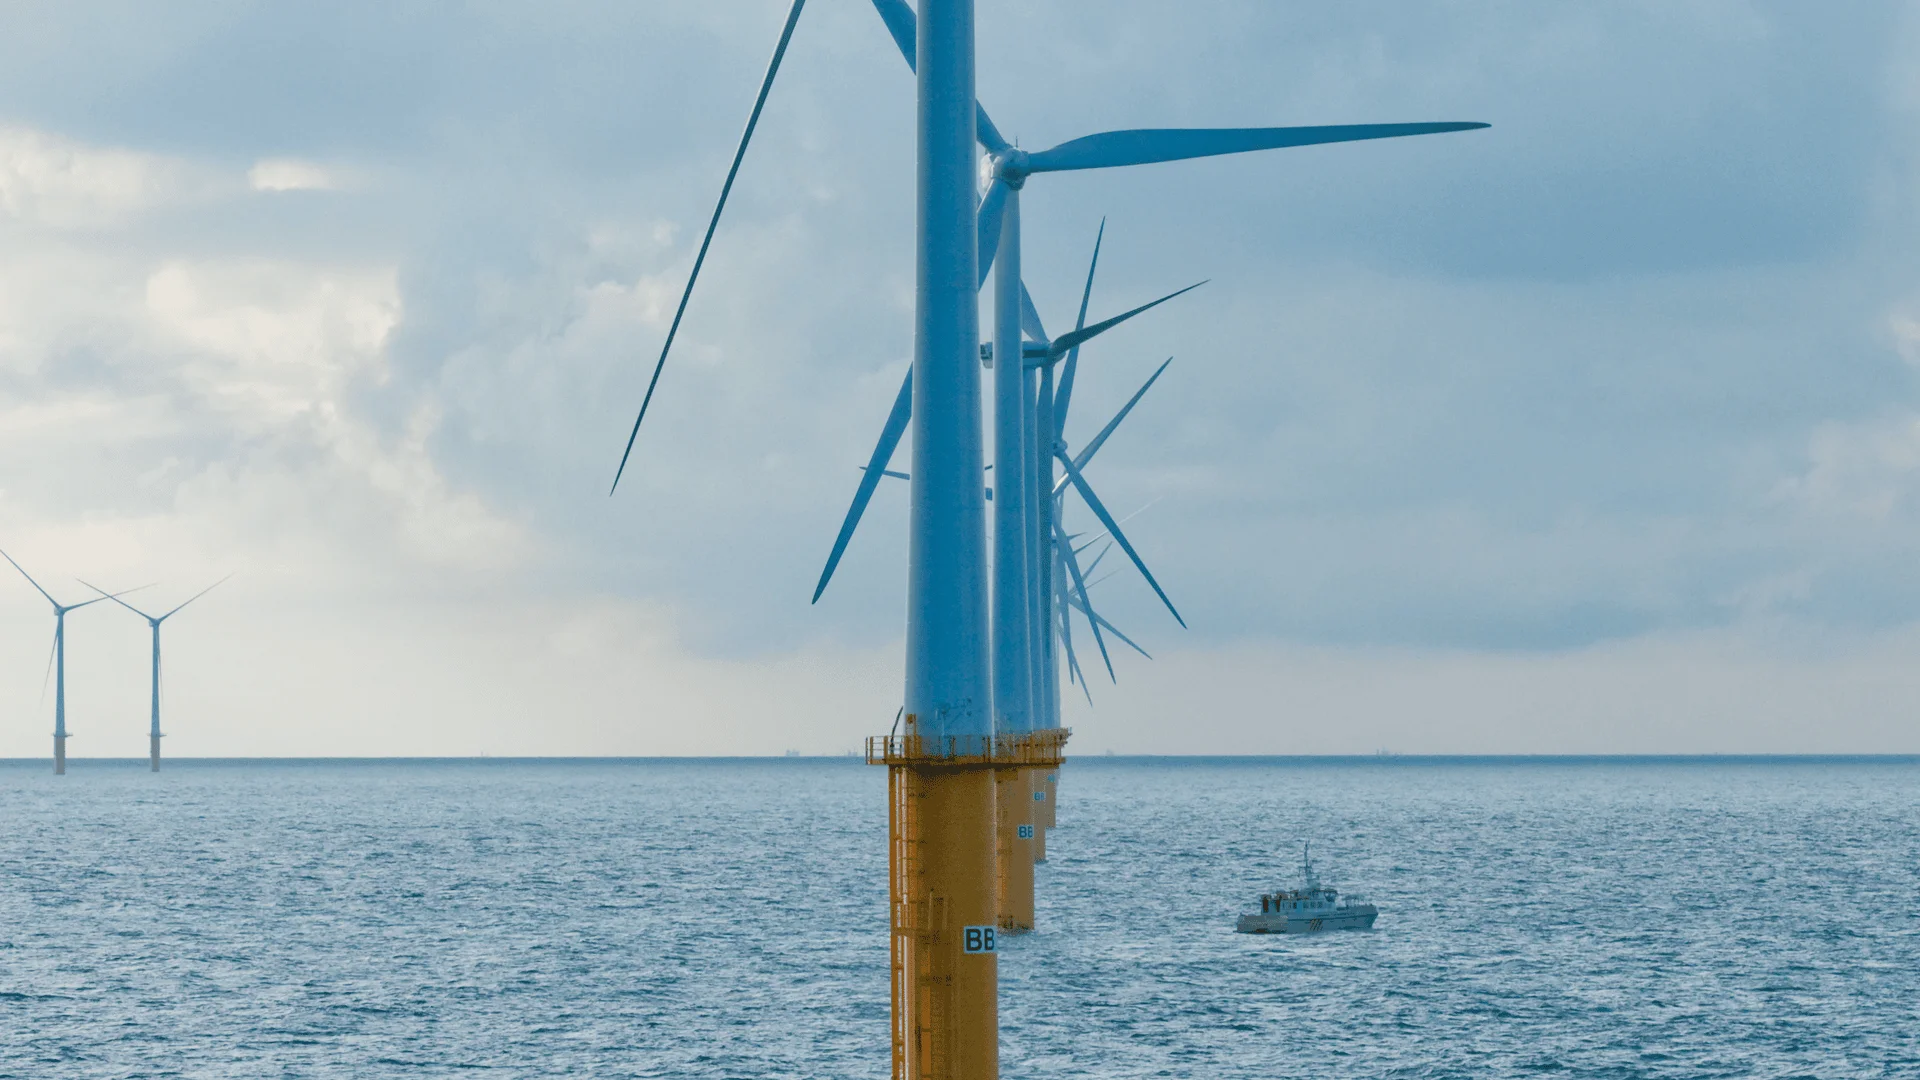 offshore wind farm and vessel